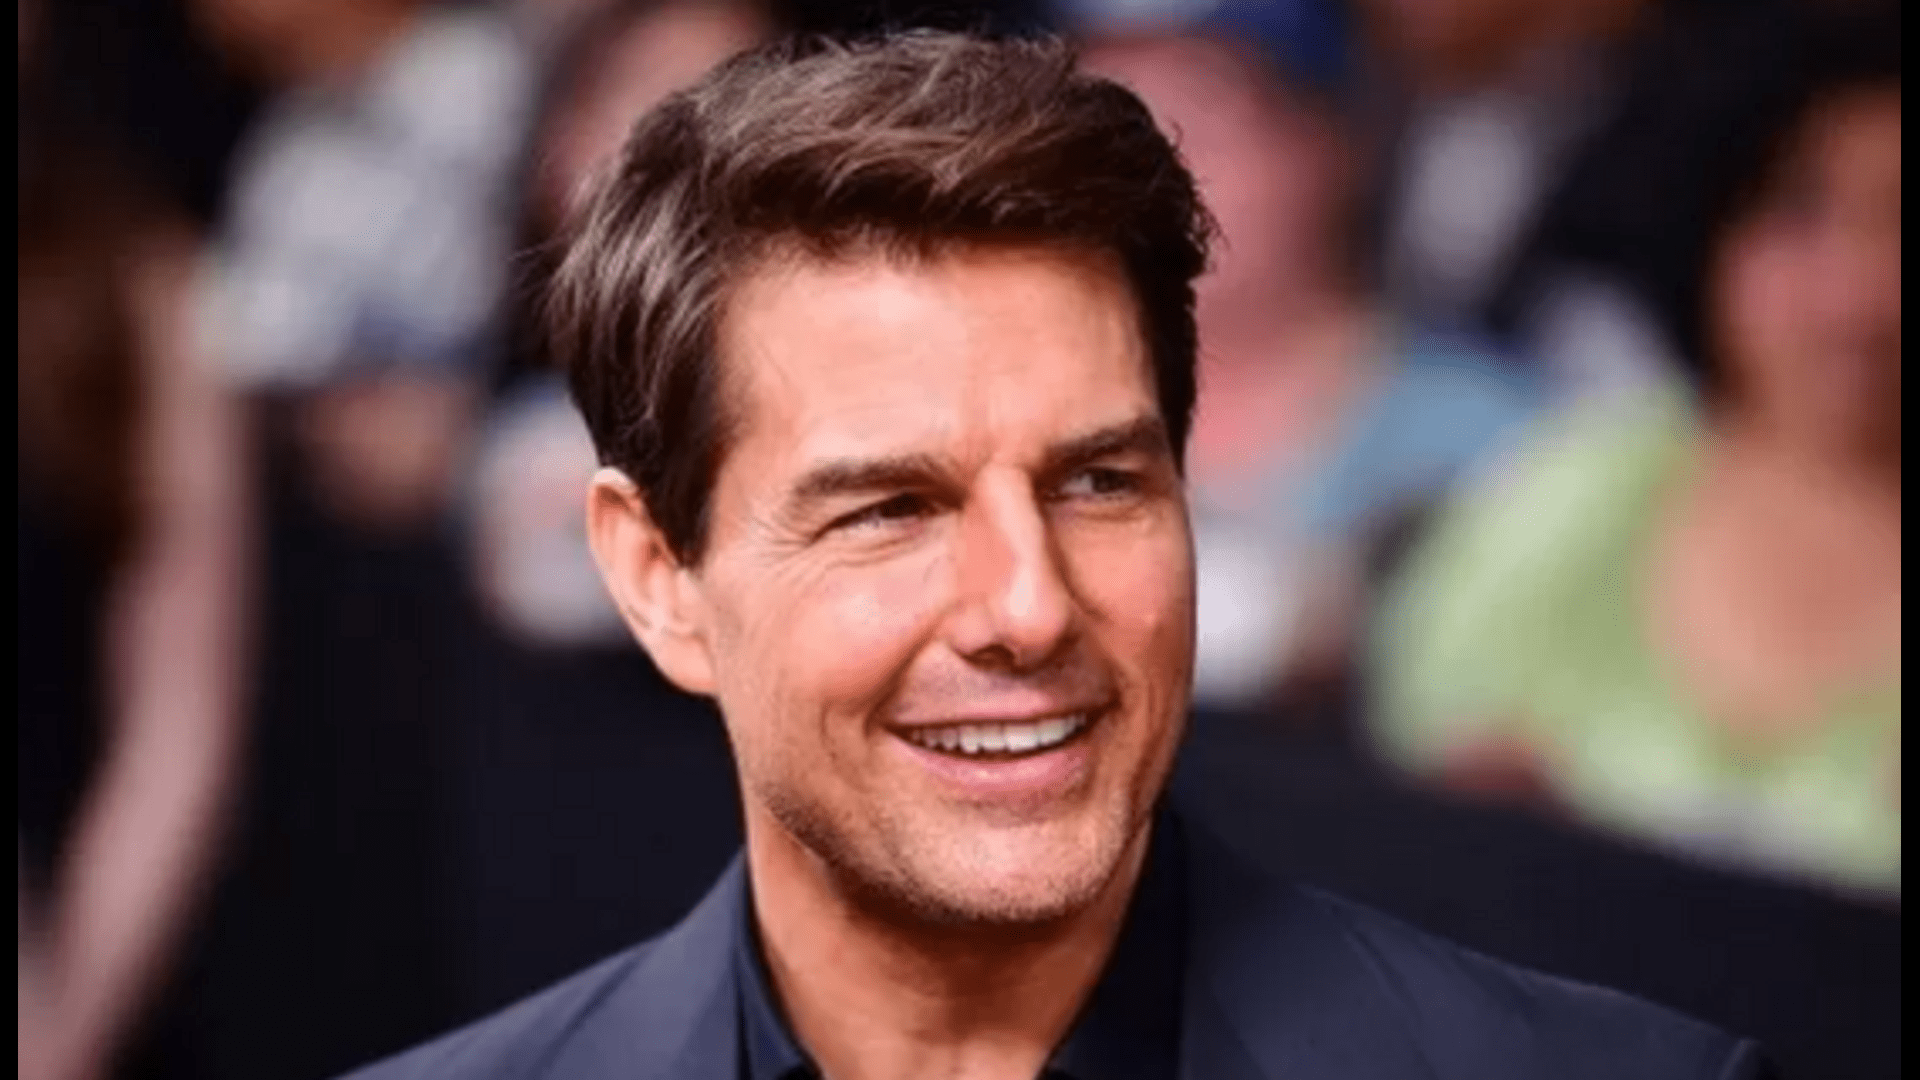 tom-cruise-will-be-back-before-he-can-leave-filming-has-begun-on-the-eighth-installment-of-the-mission-impossible-franchise